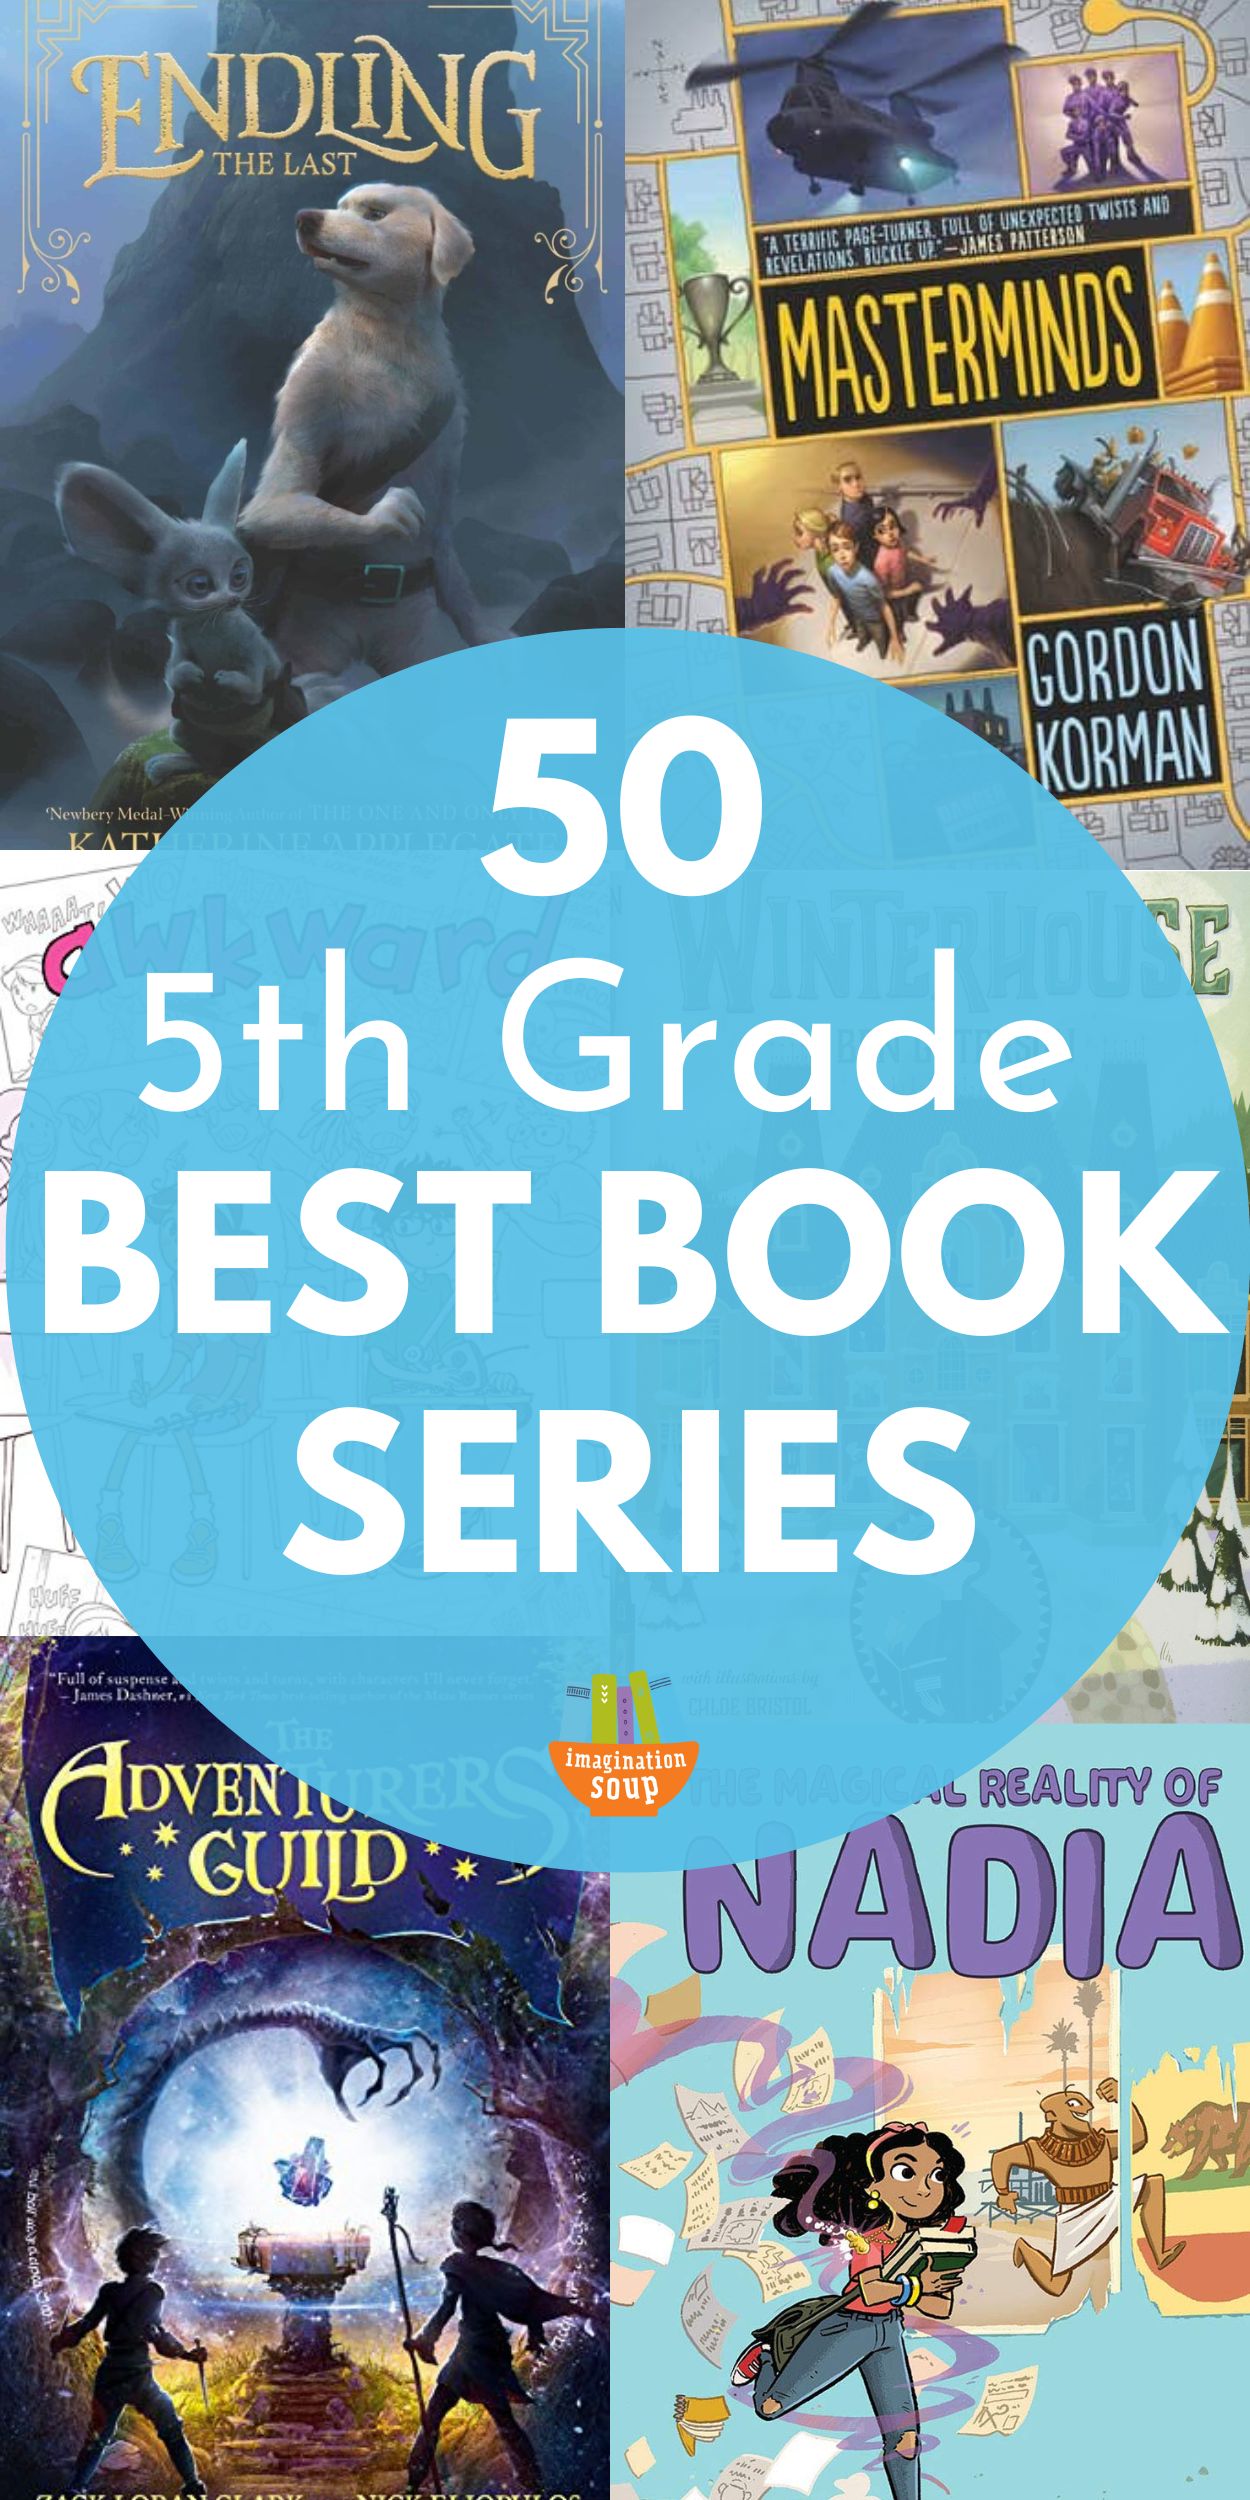 50 best book series for 5th graders